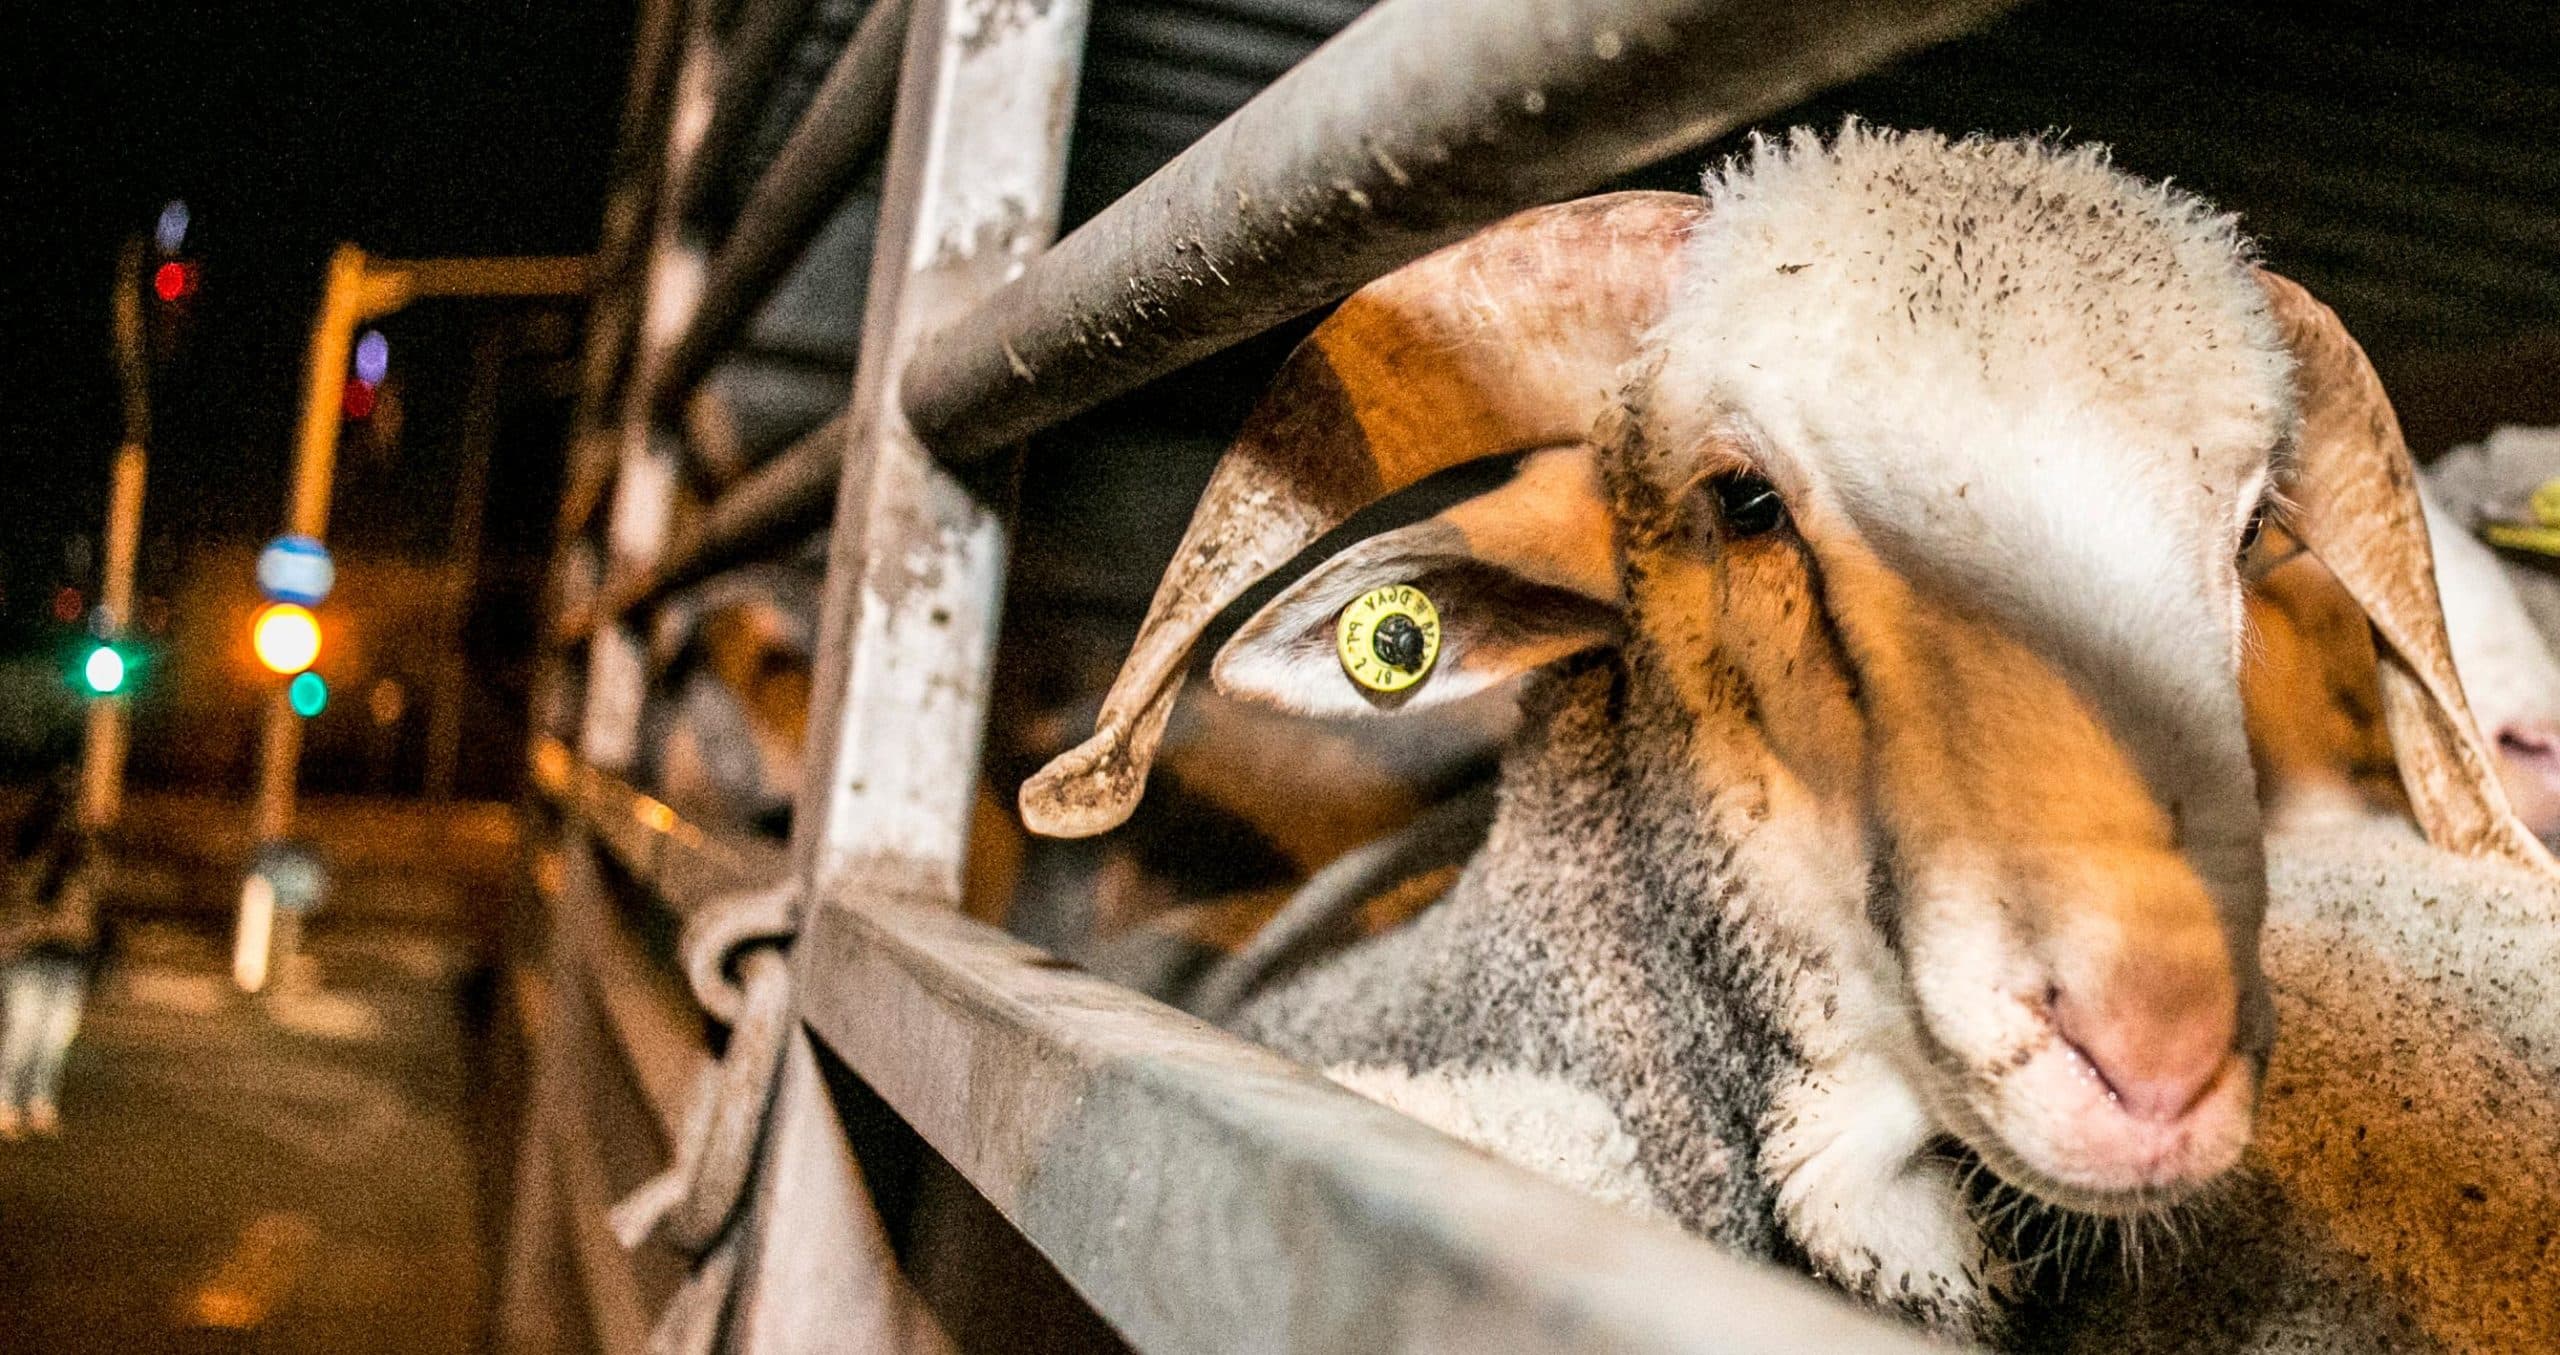 Help end live sheep exports